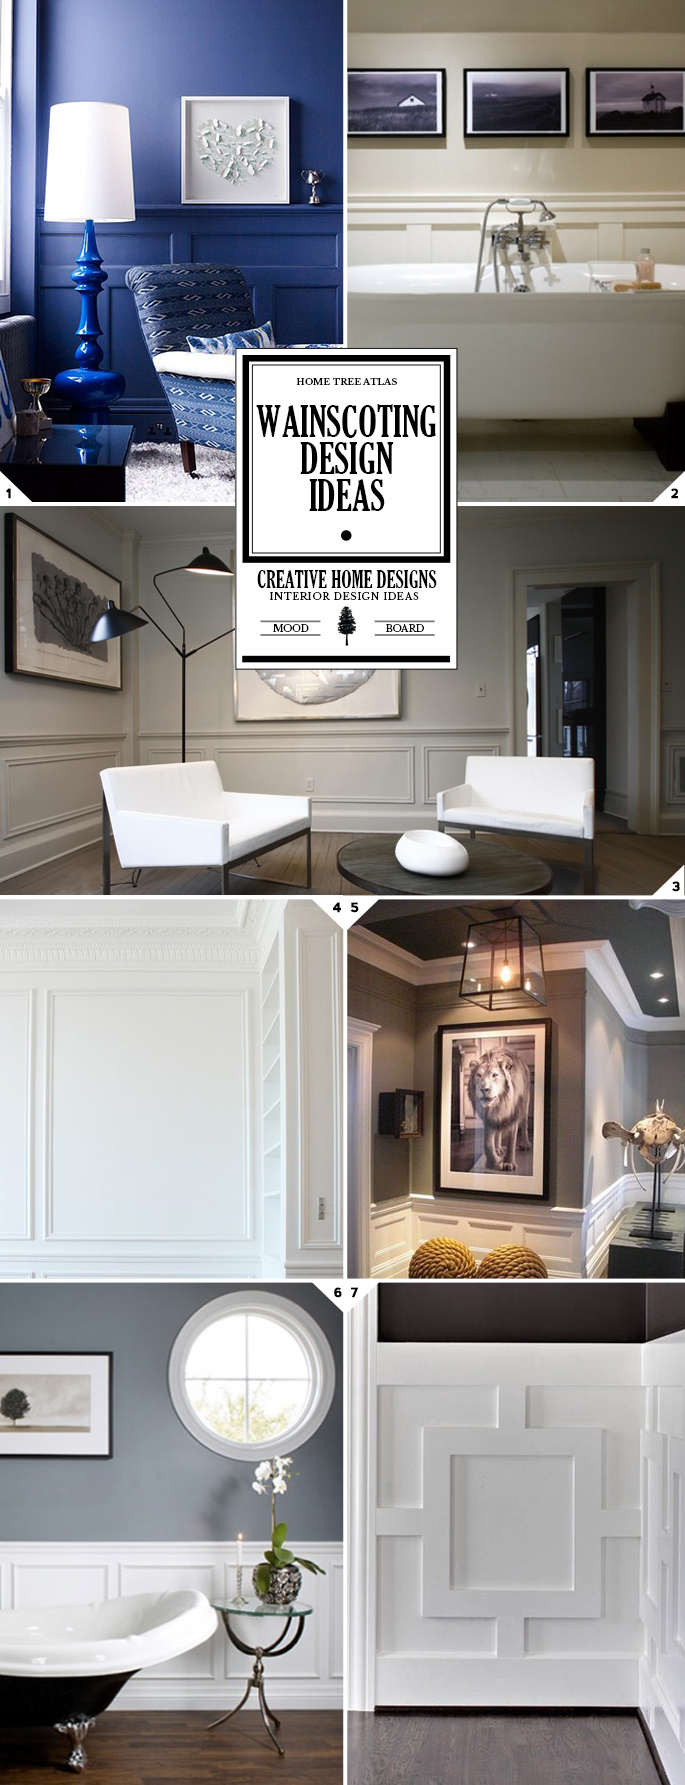 The Finishing Touch: Wainscoting Ideas and Designs